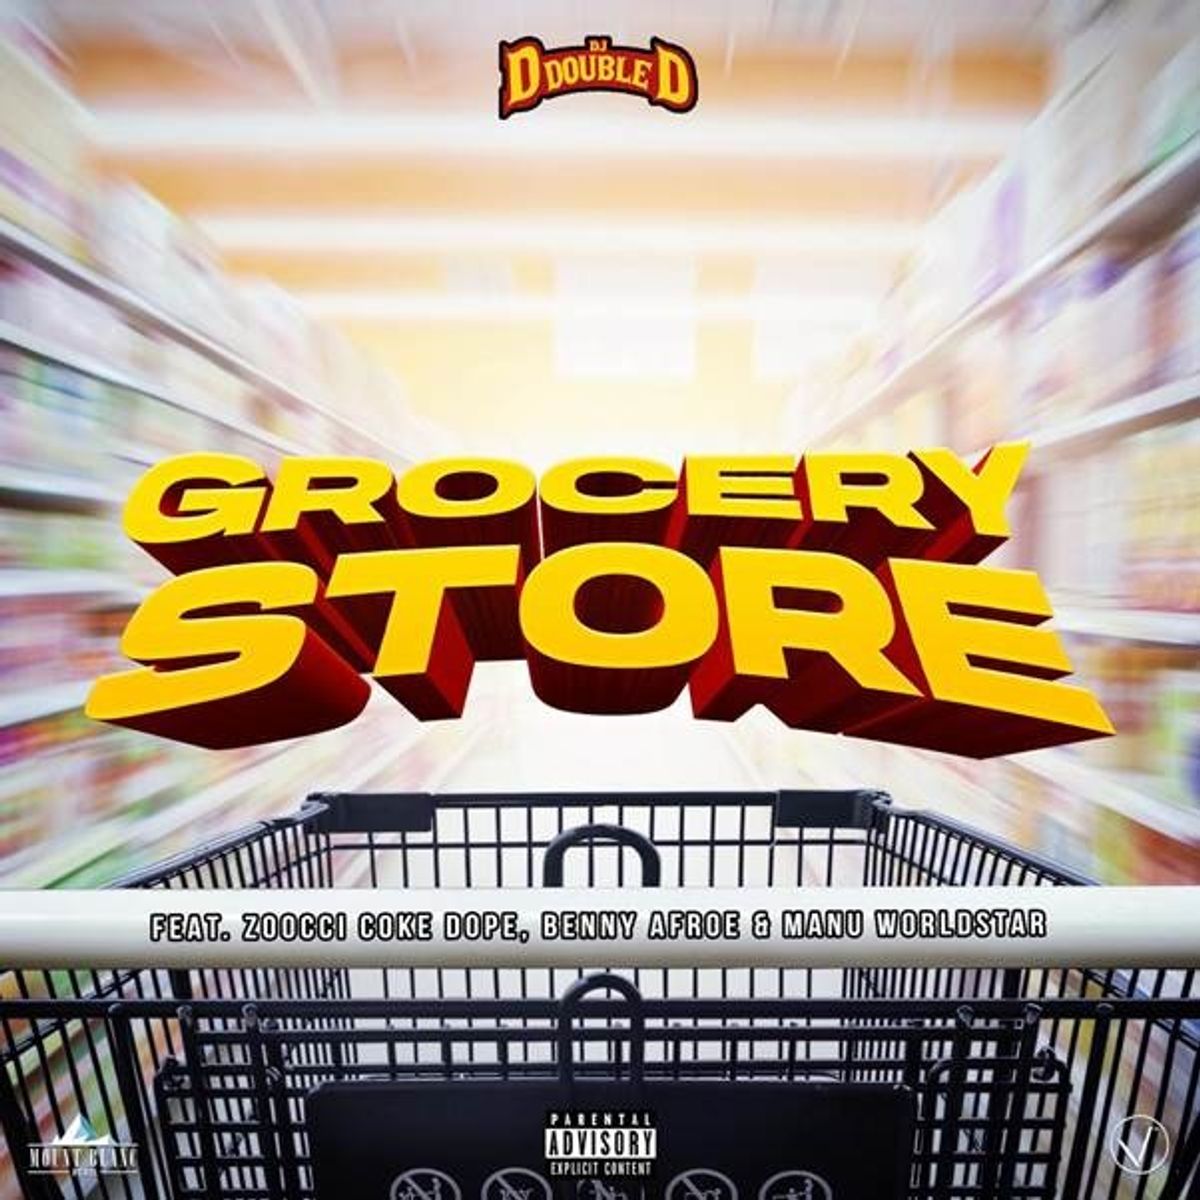 Artwork for "Grocery Store":A POV image of a shopping cart with floating text. 